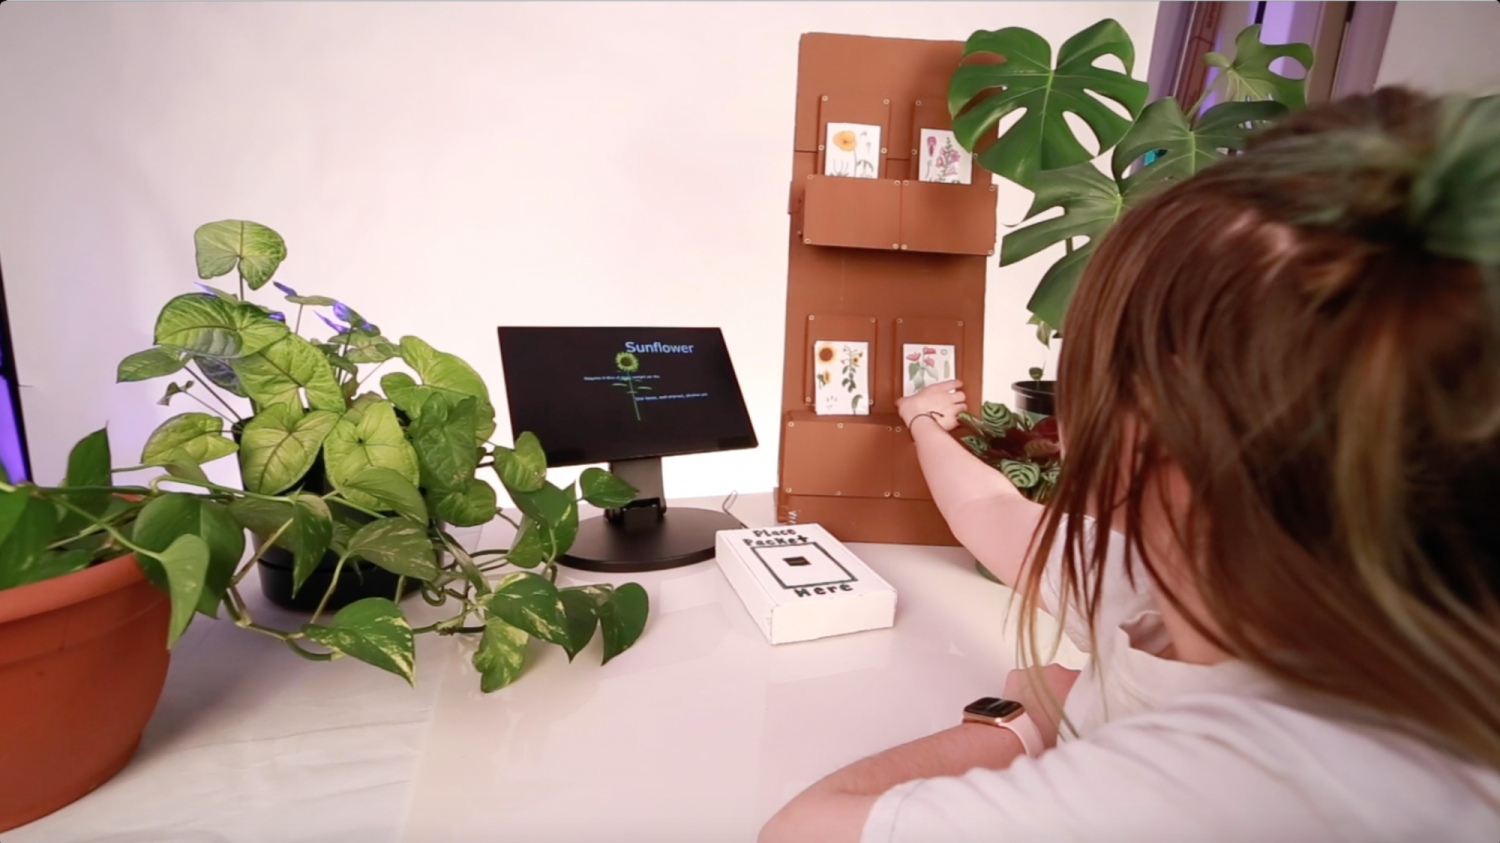 Person using the installation with computer monitor and plants on a table